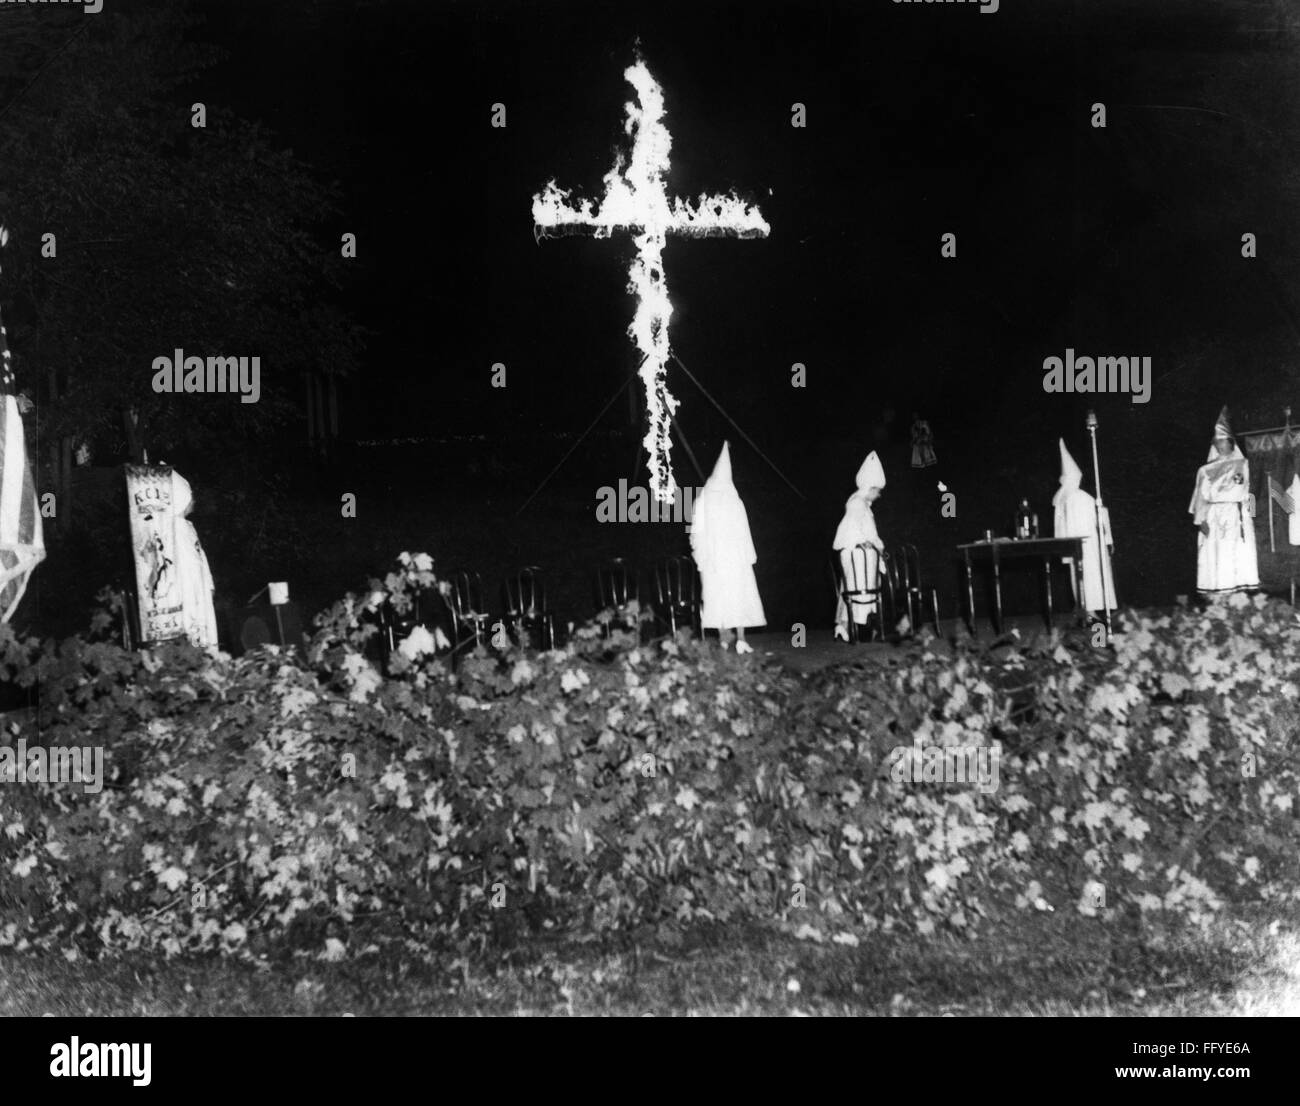 KU KLUX KLAN RALLY, 1940. /nCross burning at a rally in support of 'Americanism,' conducted jointly by the Ku Klux Klan and the German-American Bund, at the Bund's Camp Nordland in Andover, New Jersey, 18 August 1940. Stock Photo